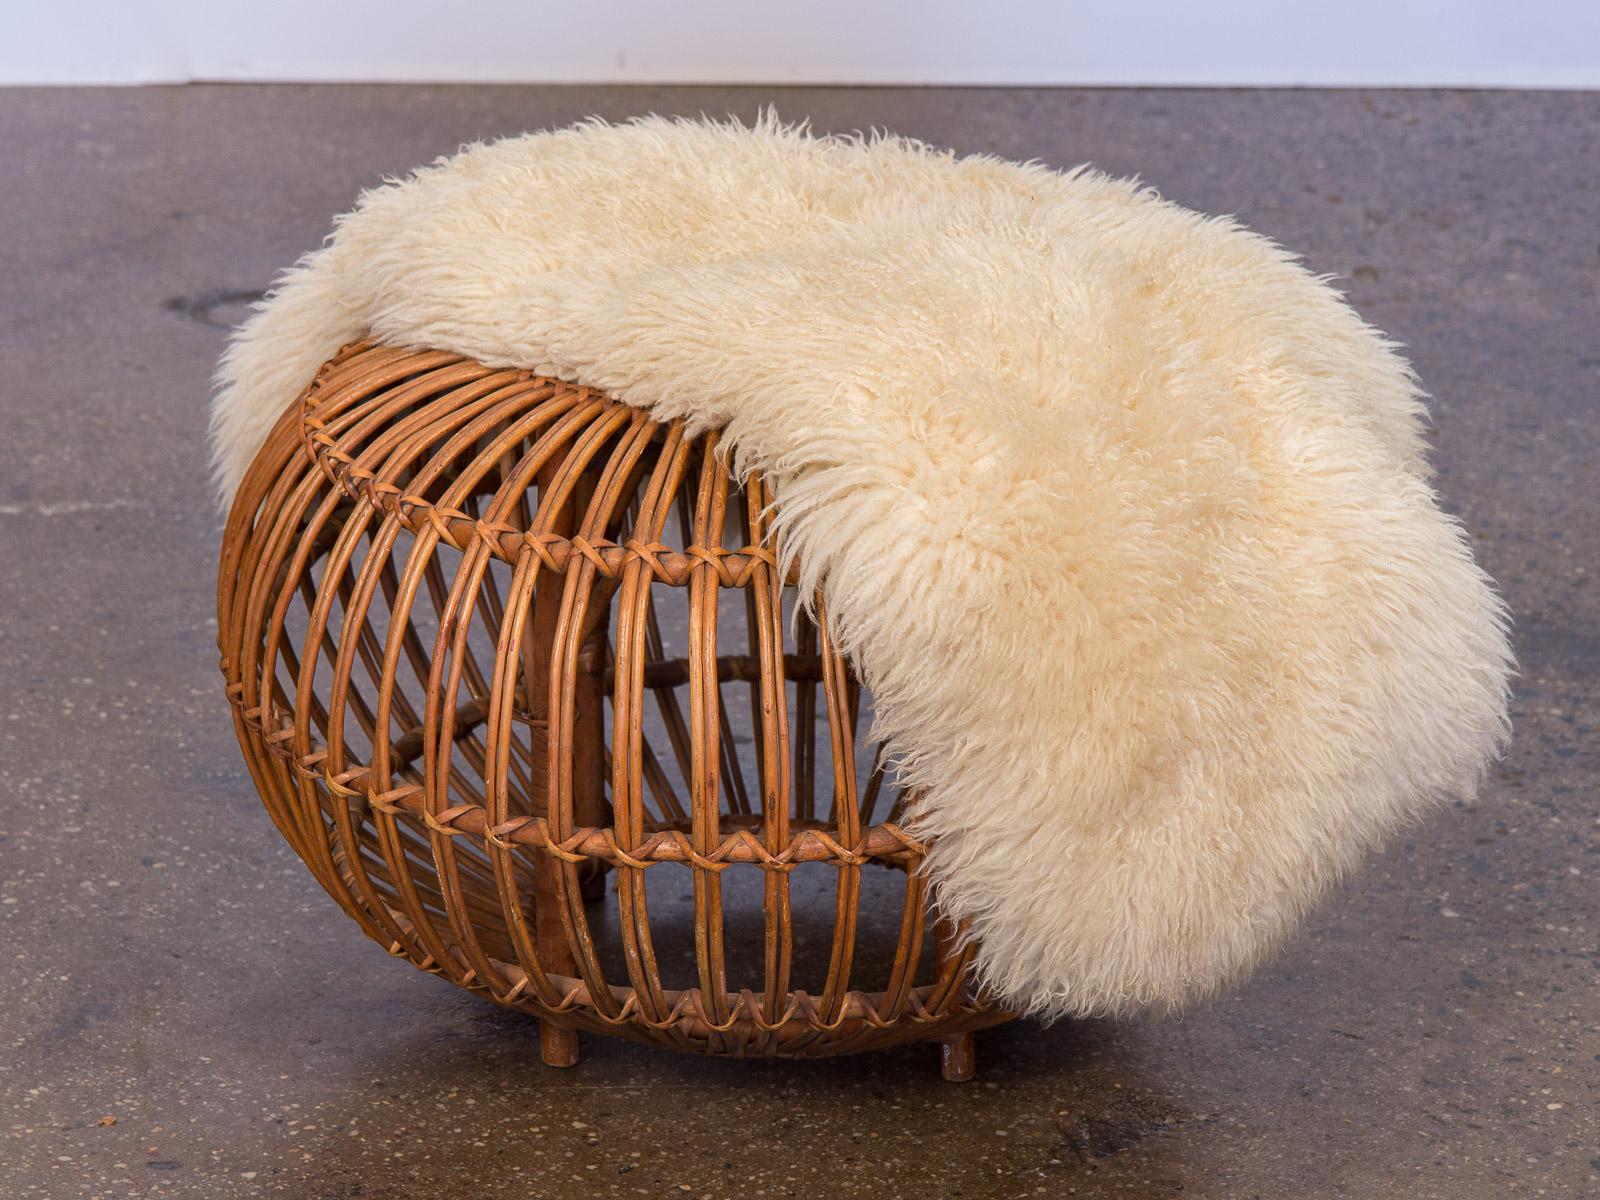 Vintage woven rattan ottoman in the manner of Franco Albini, designed in 1951. Age-appropriate wear to the woven rattan, but ours is a very nice, clean example from the 1960s. Sound construction woven ties are tightly bound. A stylish, circular pouf